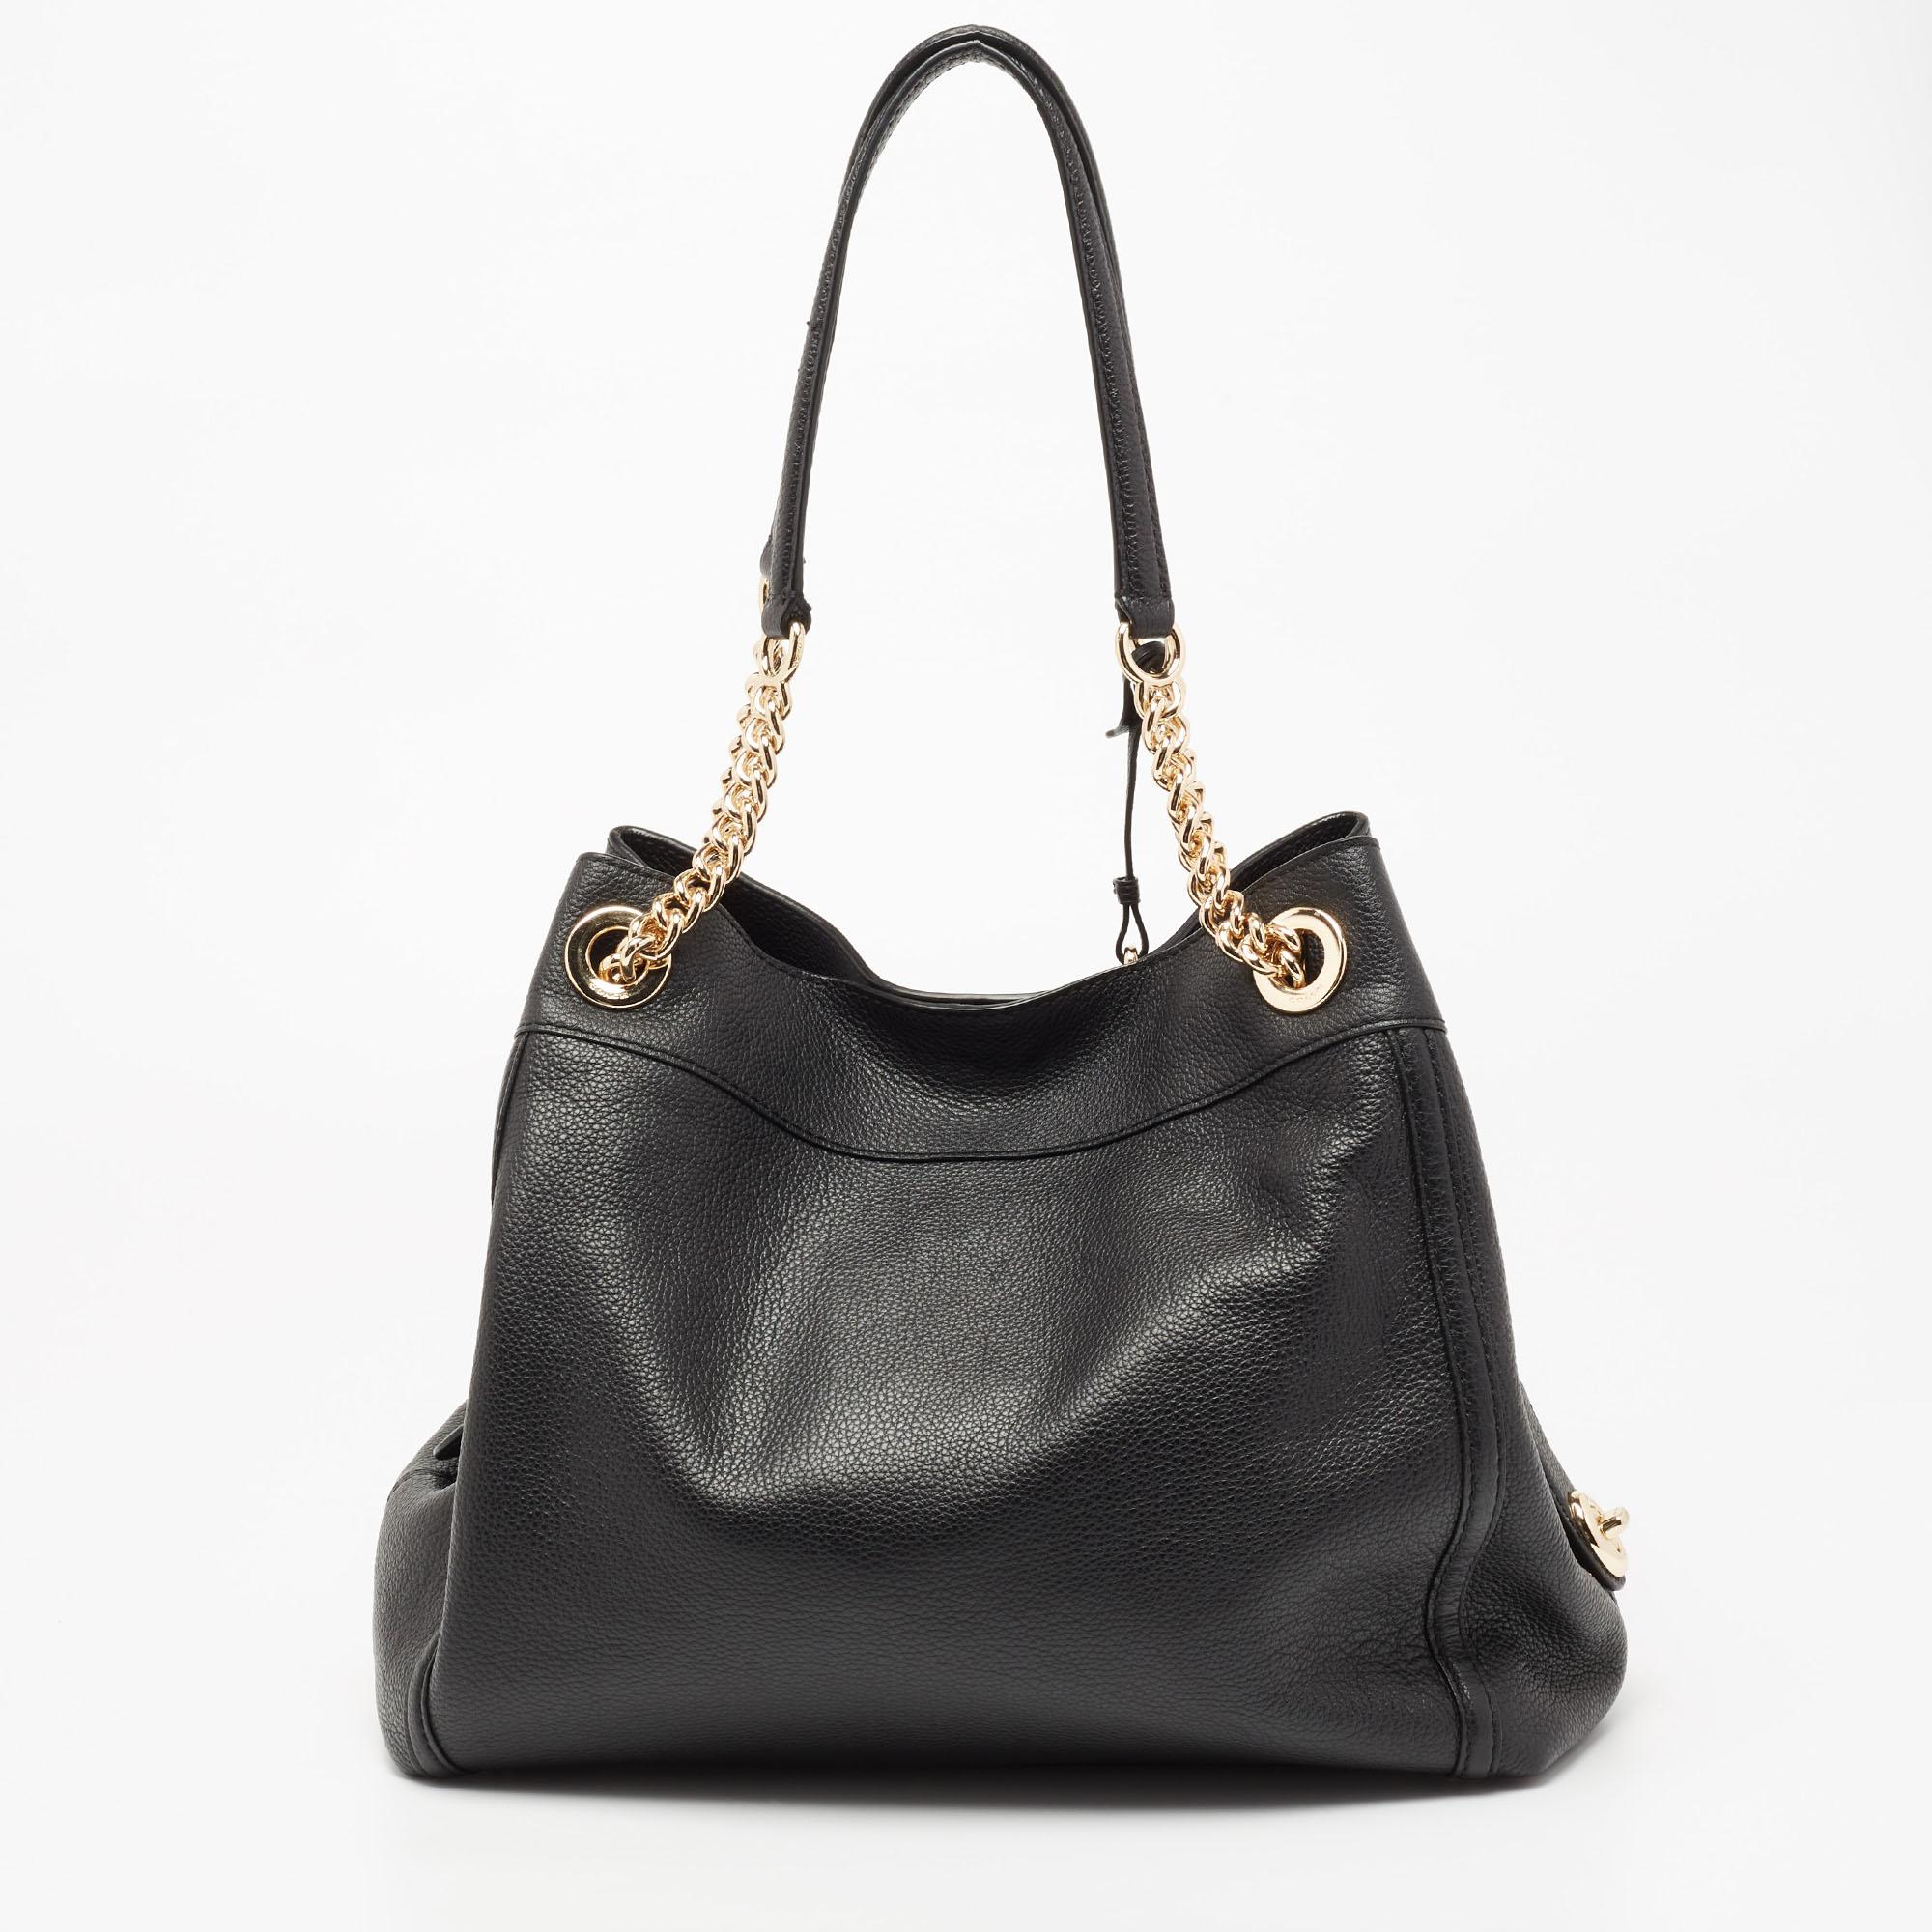 Get the lightweight and hands-free ease with the dual chain-leather handles of this Coach bag. Crafted from leather, it gets a signature touch with brand detailing on the front, and the bag has gold-tone accents. The nylon-lined interior has plenty